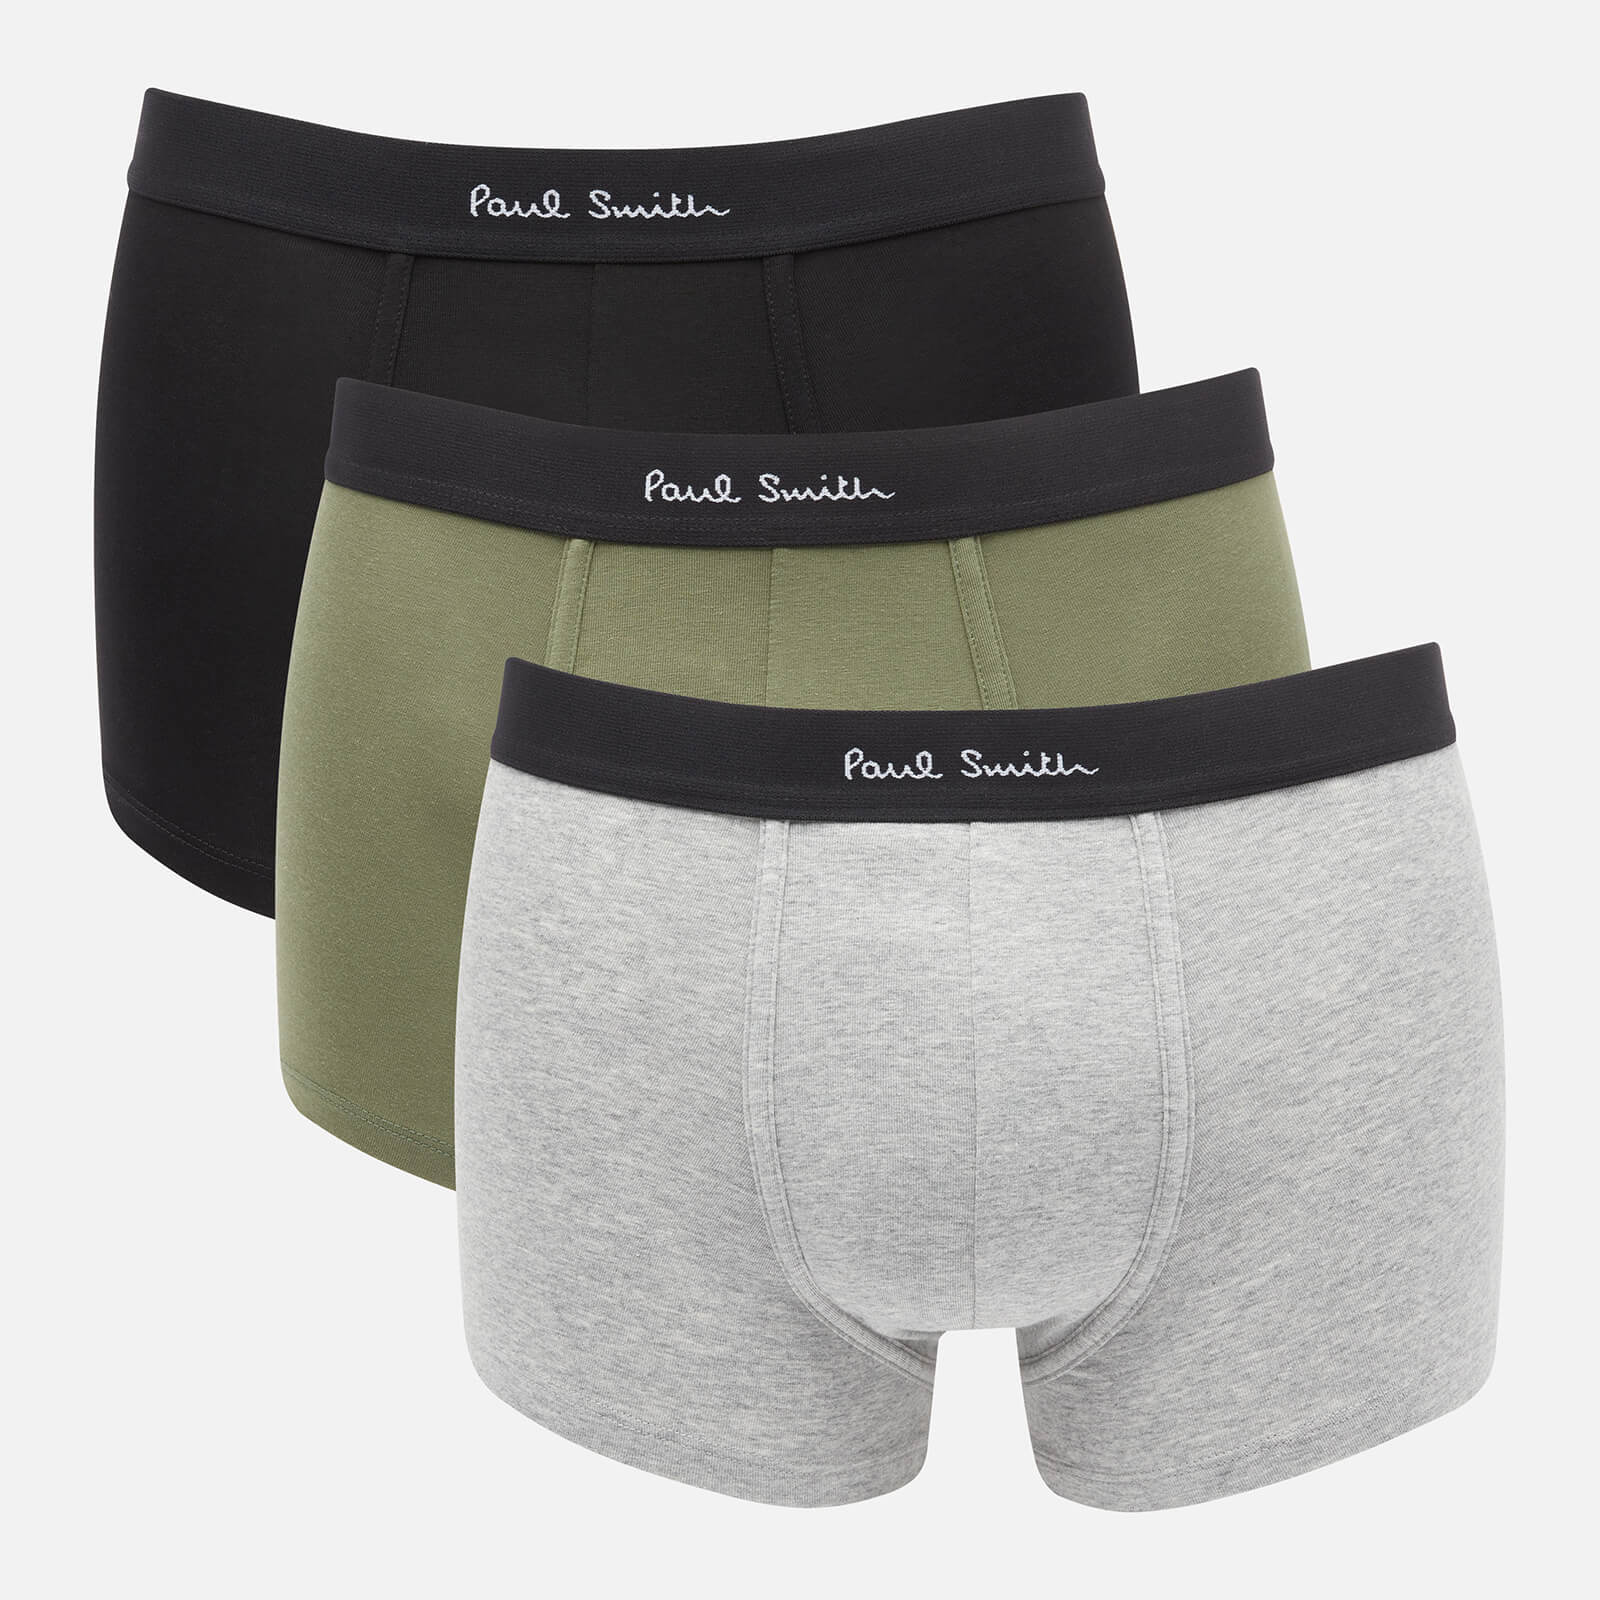 PS Paul Smith Men's 3-Pack Trunk Boxer Shorts - Black/Green/Grey - S